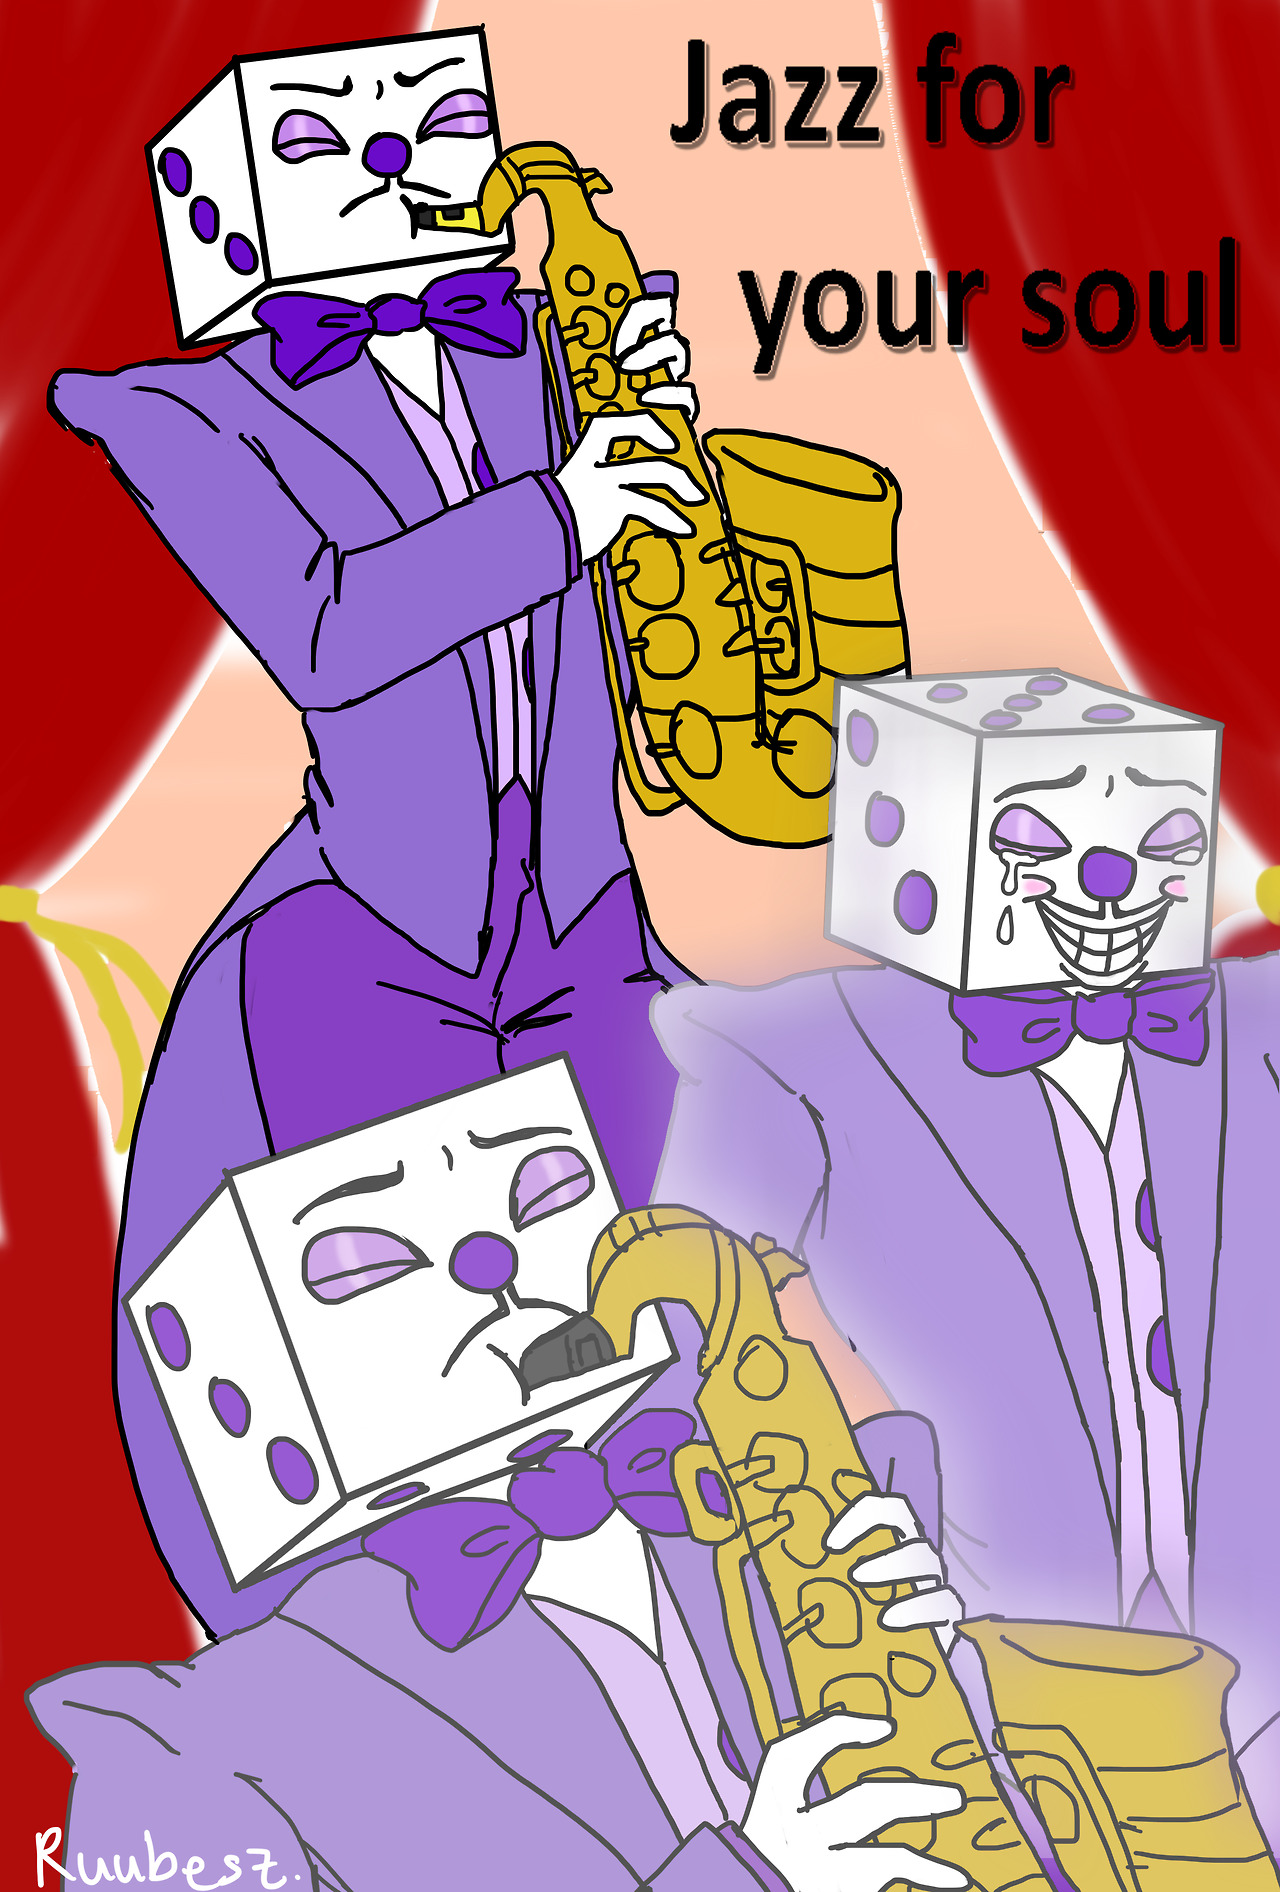 Procrastination — King Dice for your soul, probably playing his own